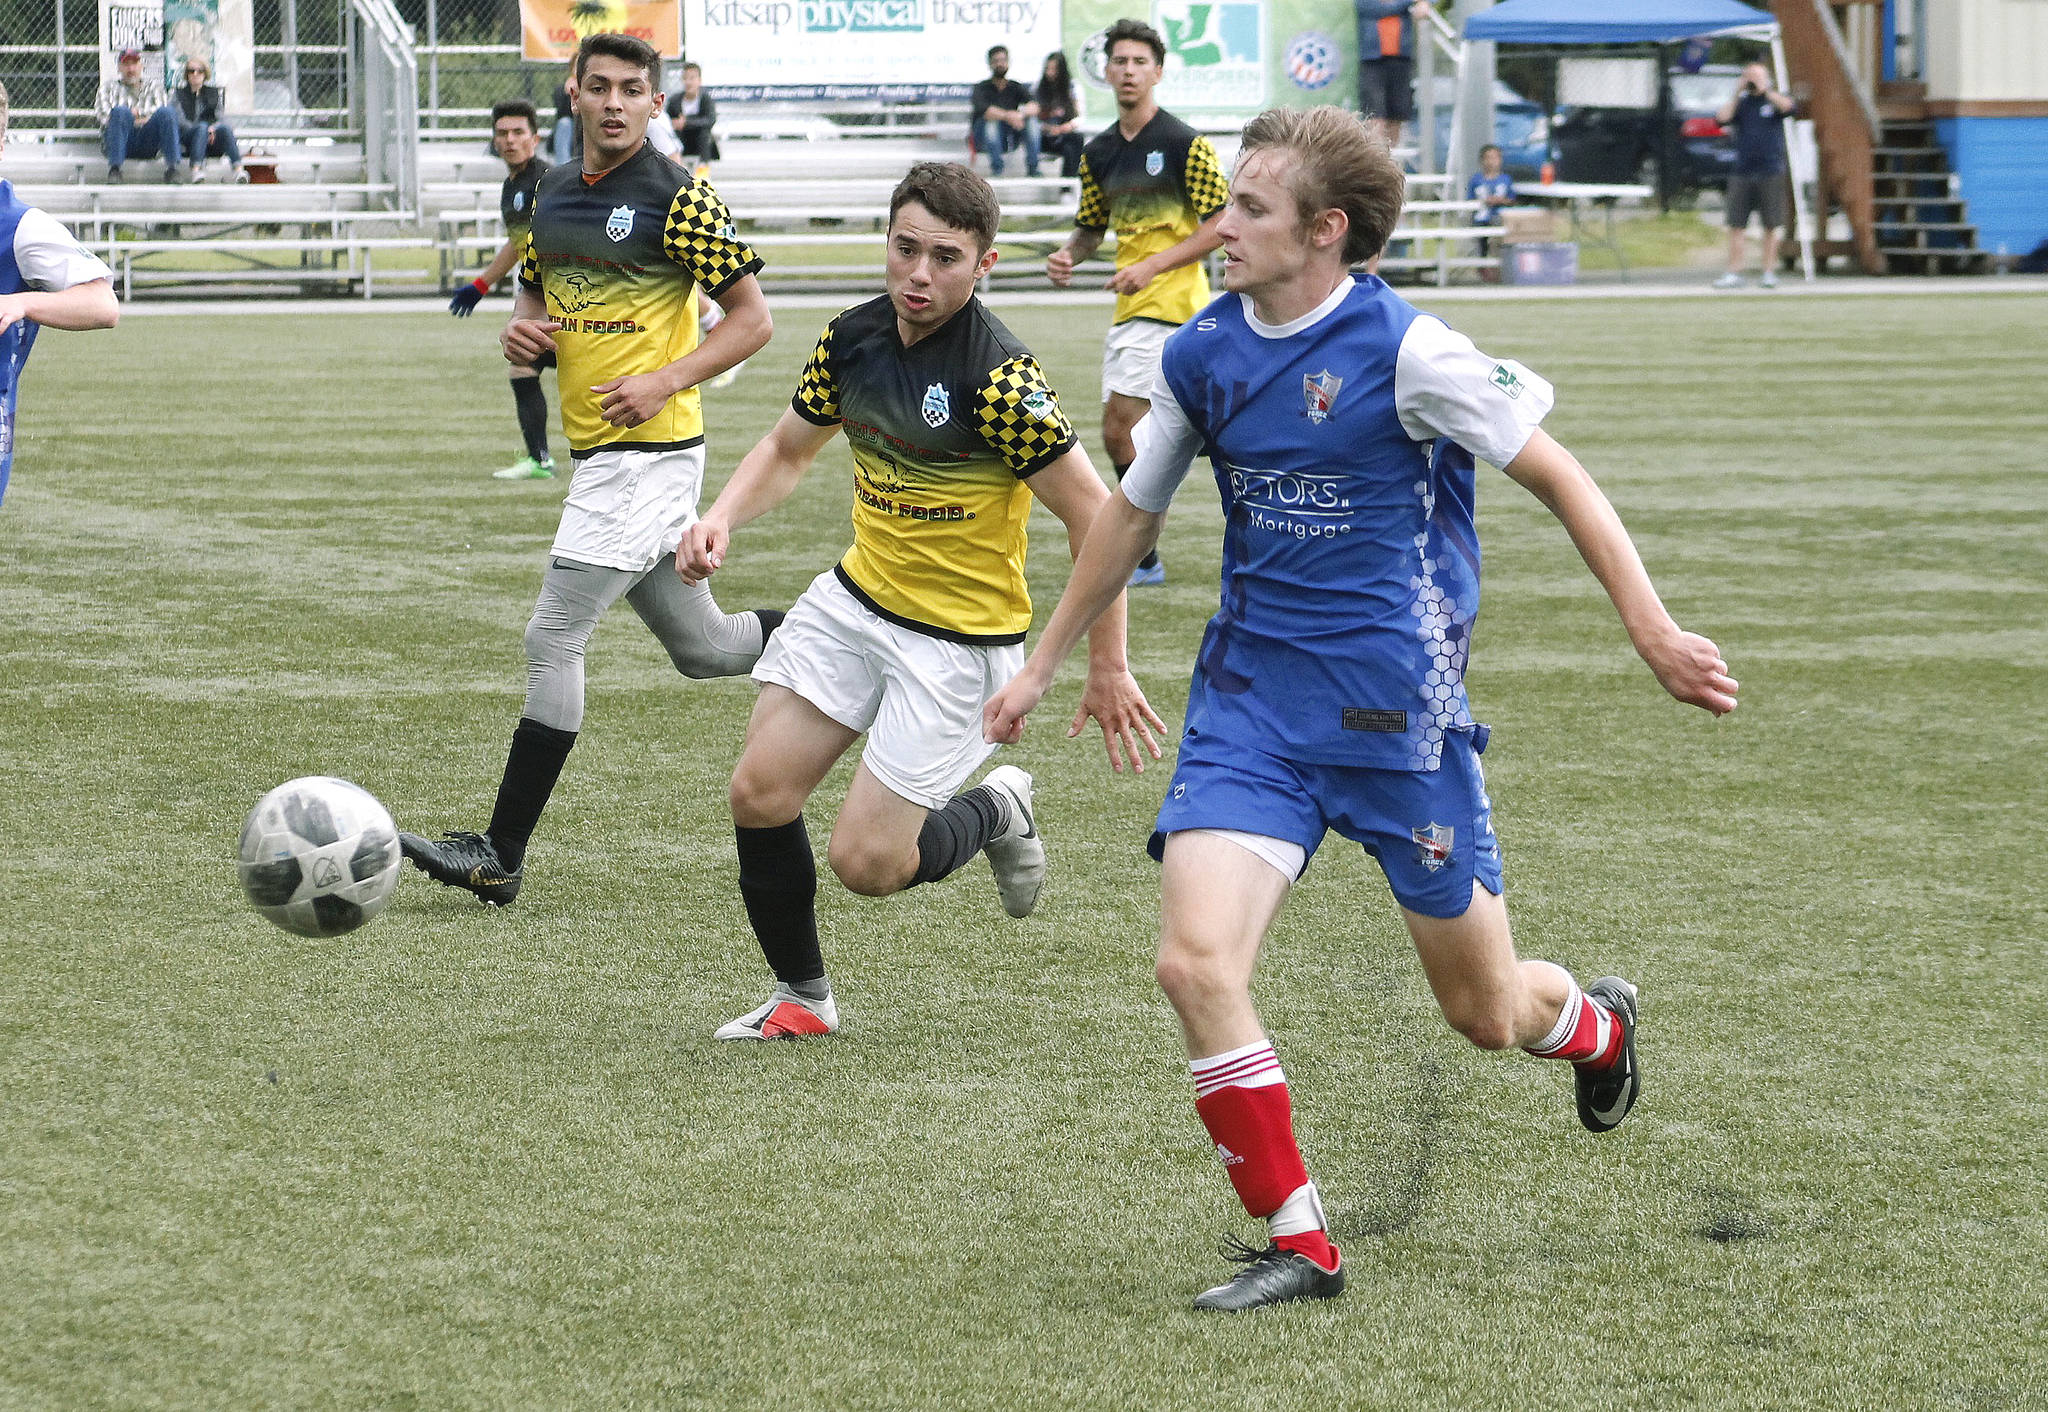 South Kitsap’s Grant Larson, as a member of the Oly-Pen Force, chases down a ball against the Vancouver Victory. (Mark Krulish/Kitsap News Group)